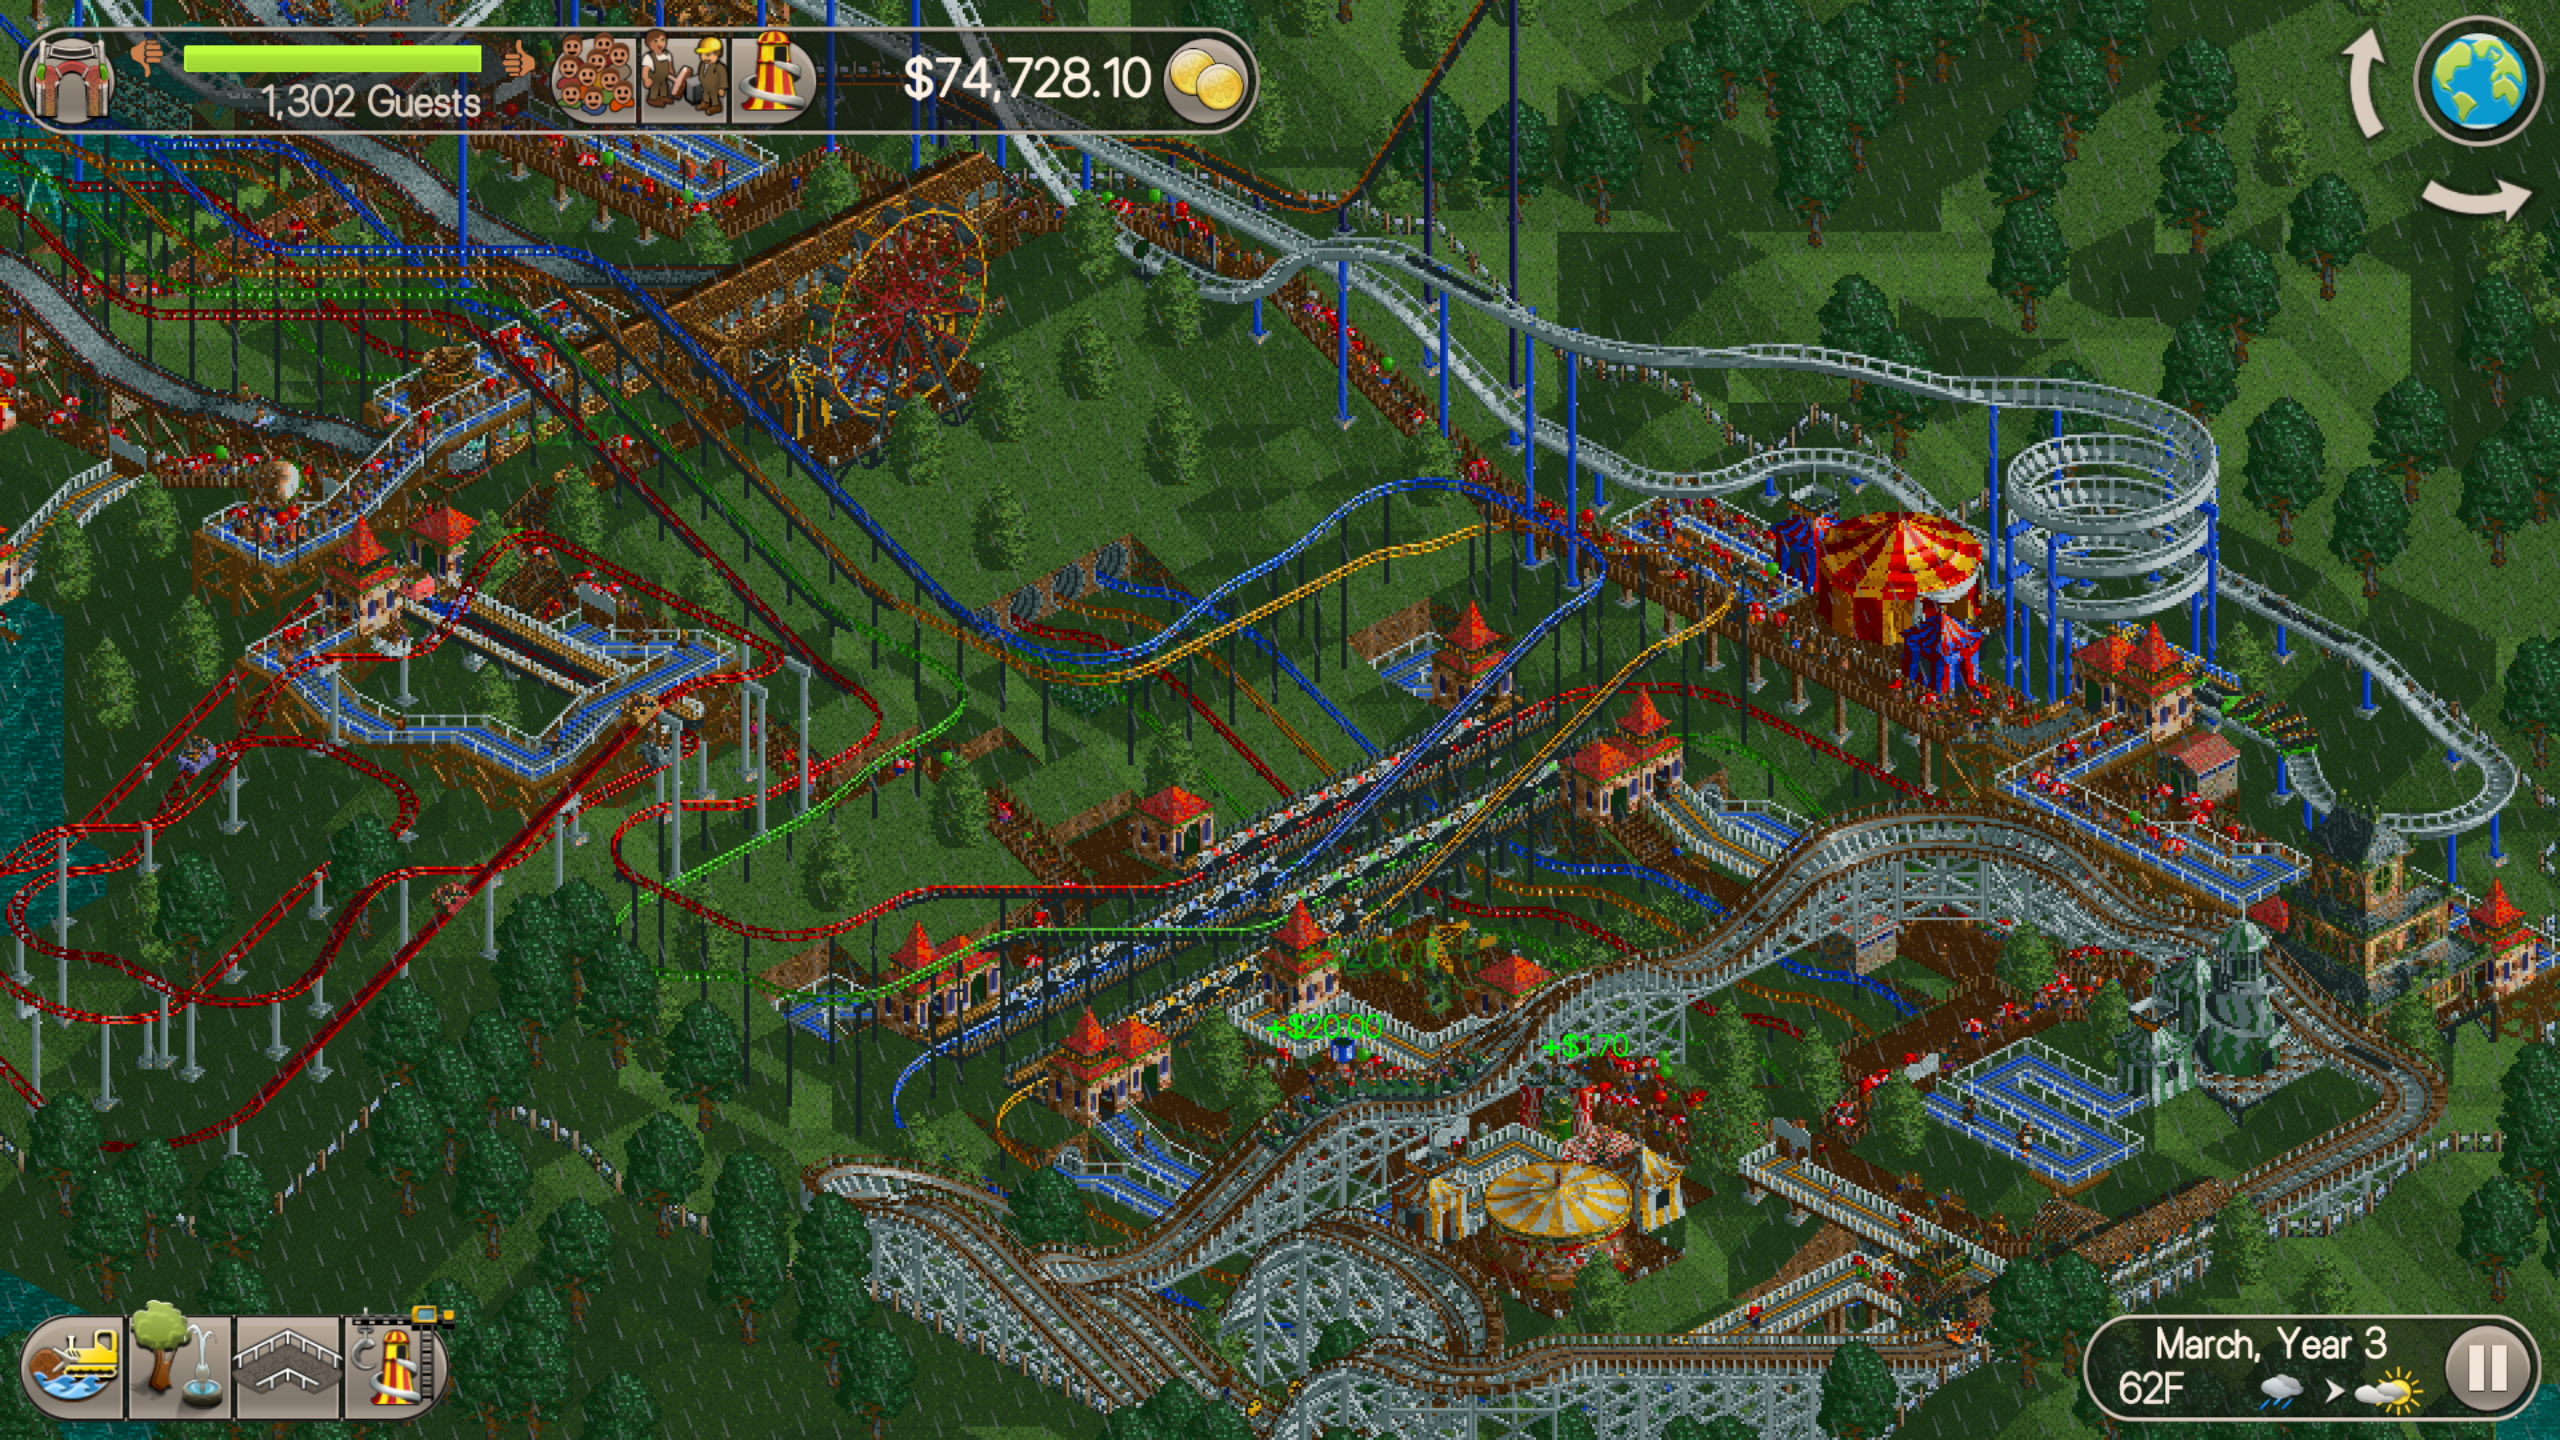 RollerCoaster Tycoon® 3, Apps